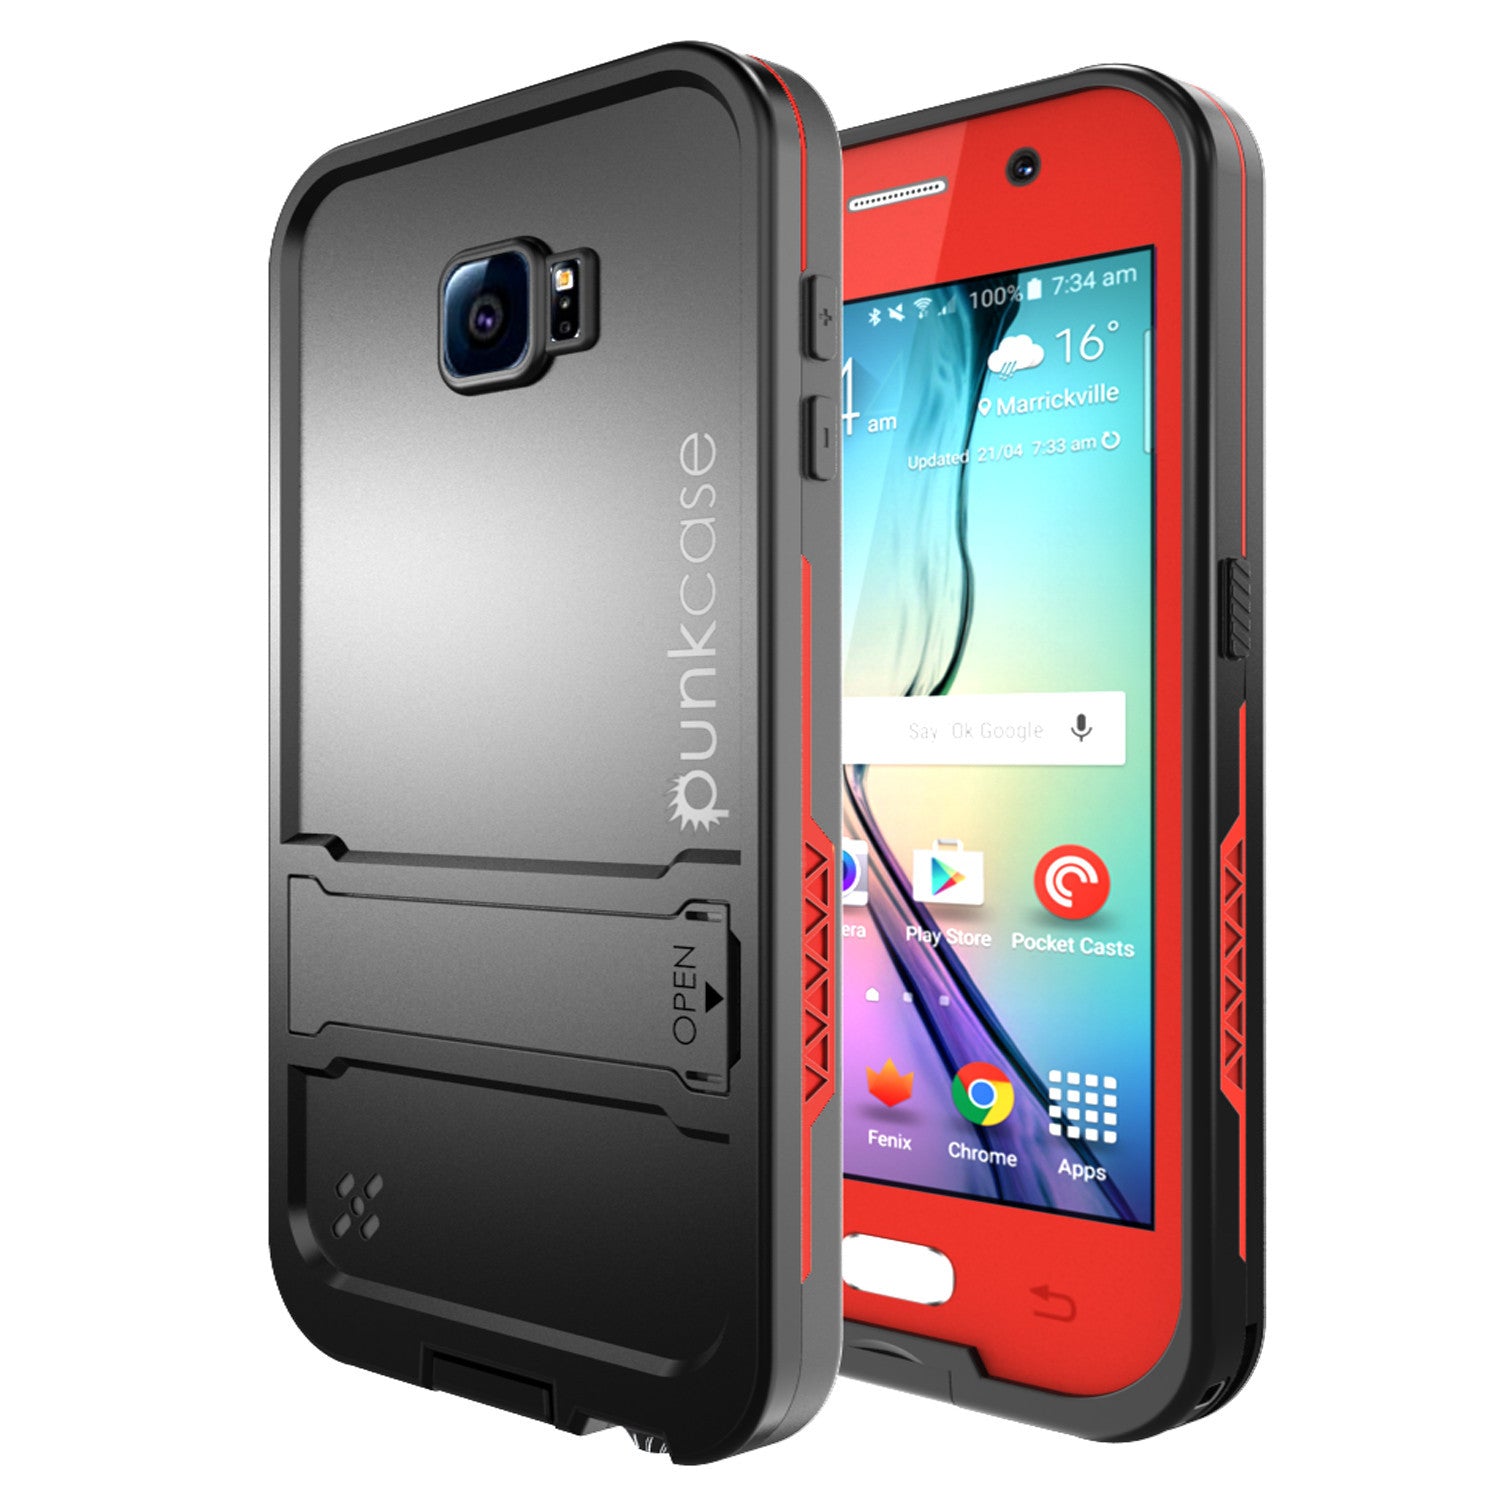 Galaxy S6 Waterproof Case, Punkcase SpikeStar Red Water/Shock/Dirt/Snow Proof | Lifetime Warranty (Color in image: red)